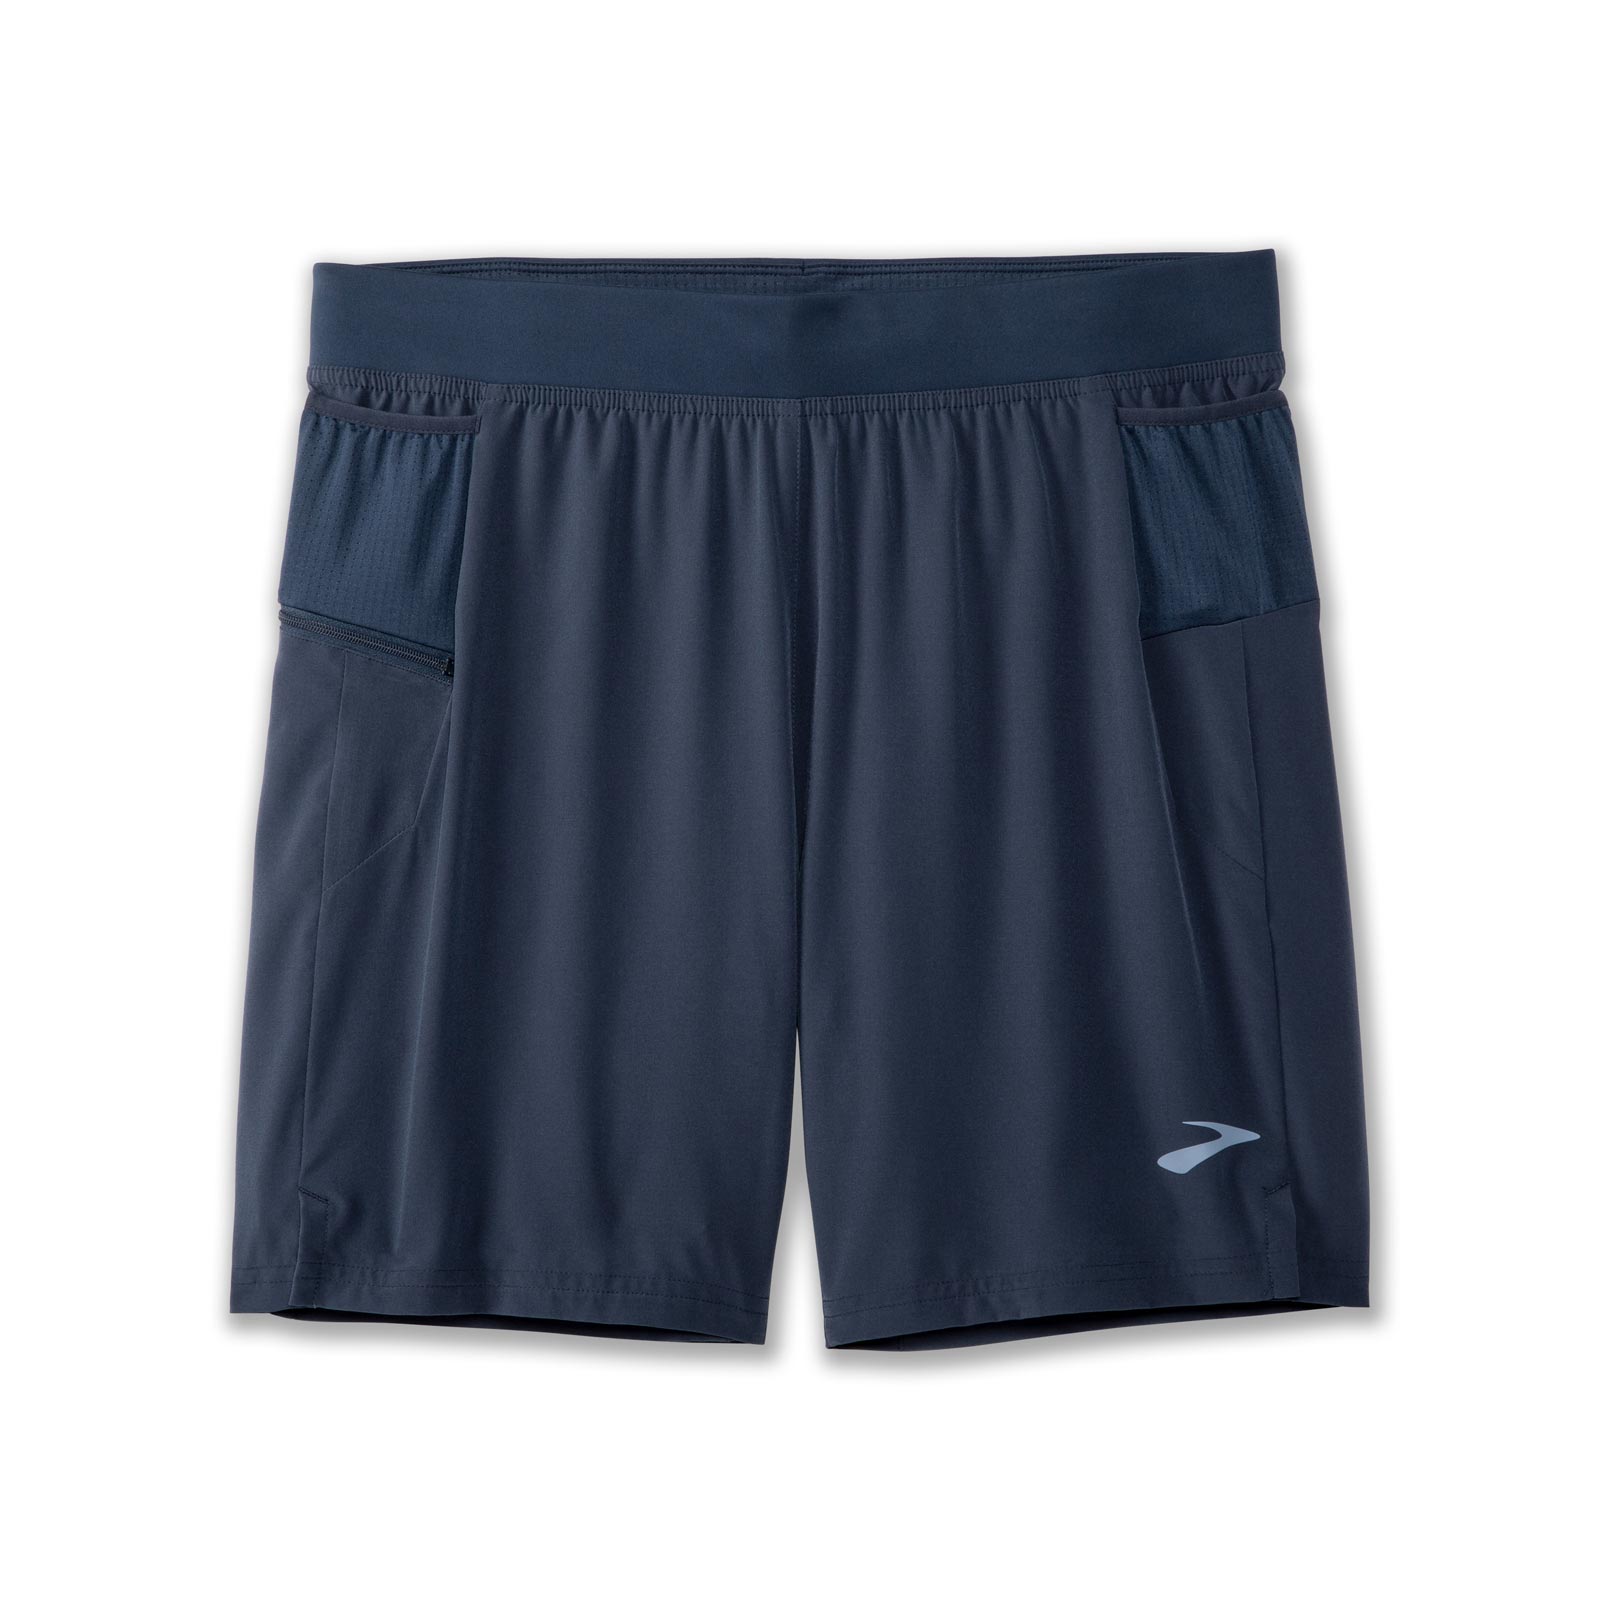 BROOKS SHERPA 7INCH 2-IN-1 MENS SHORTS